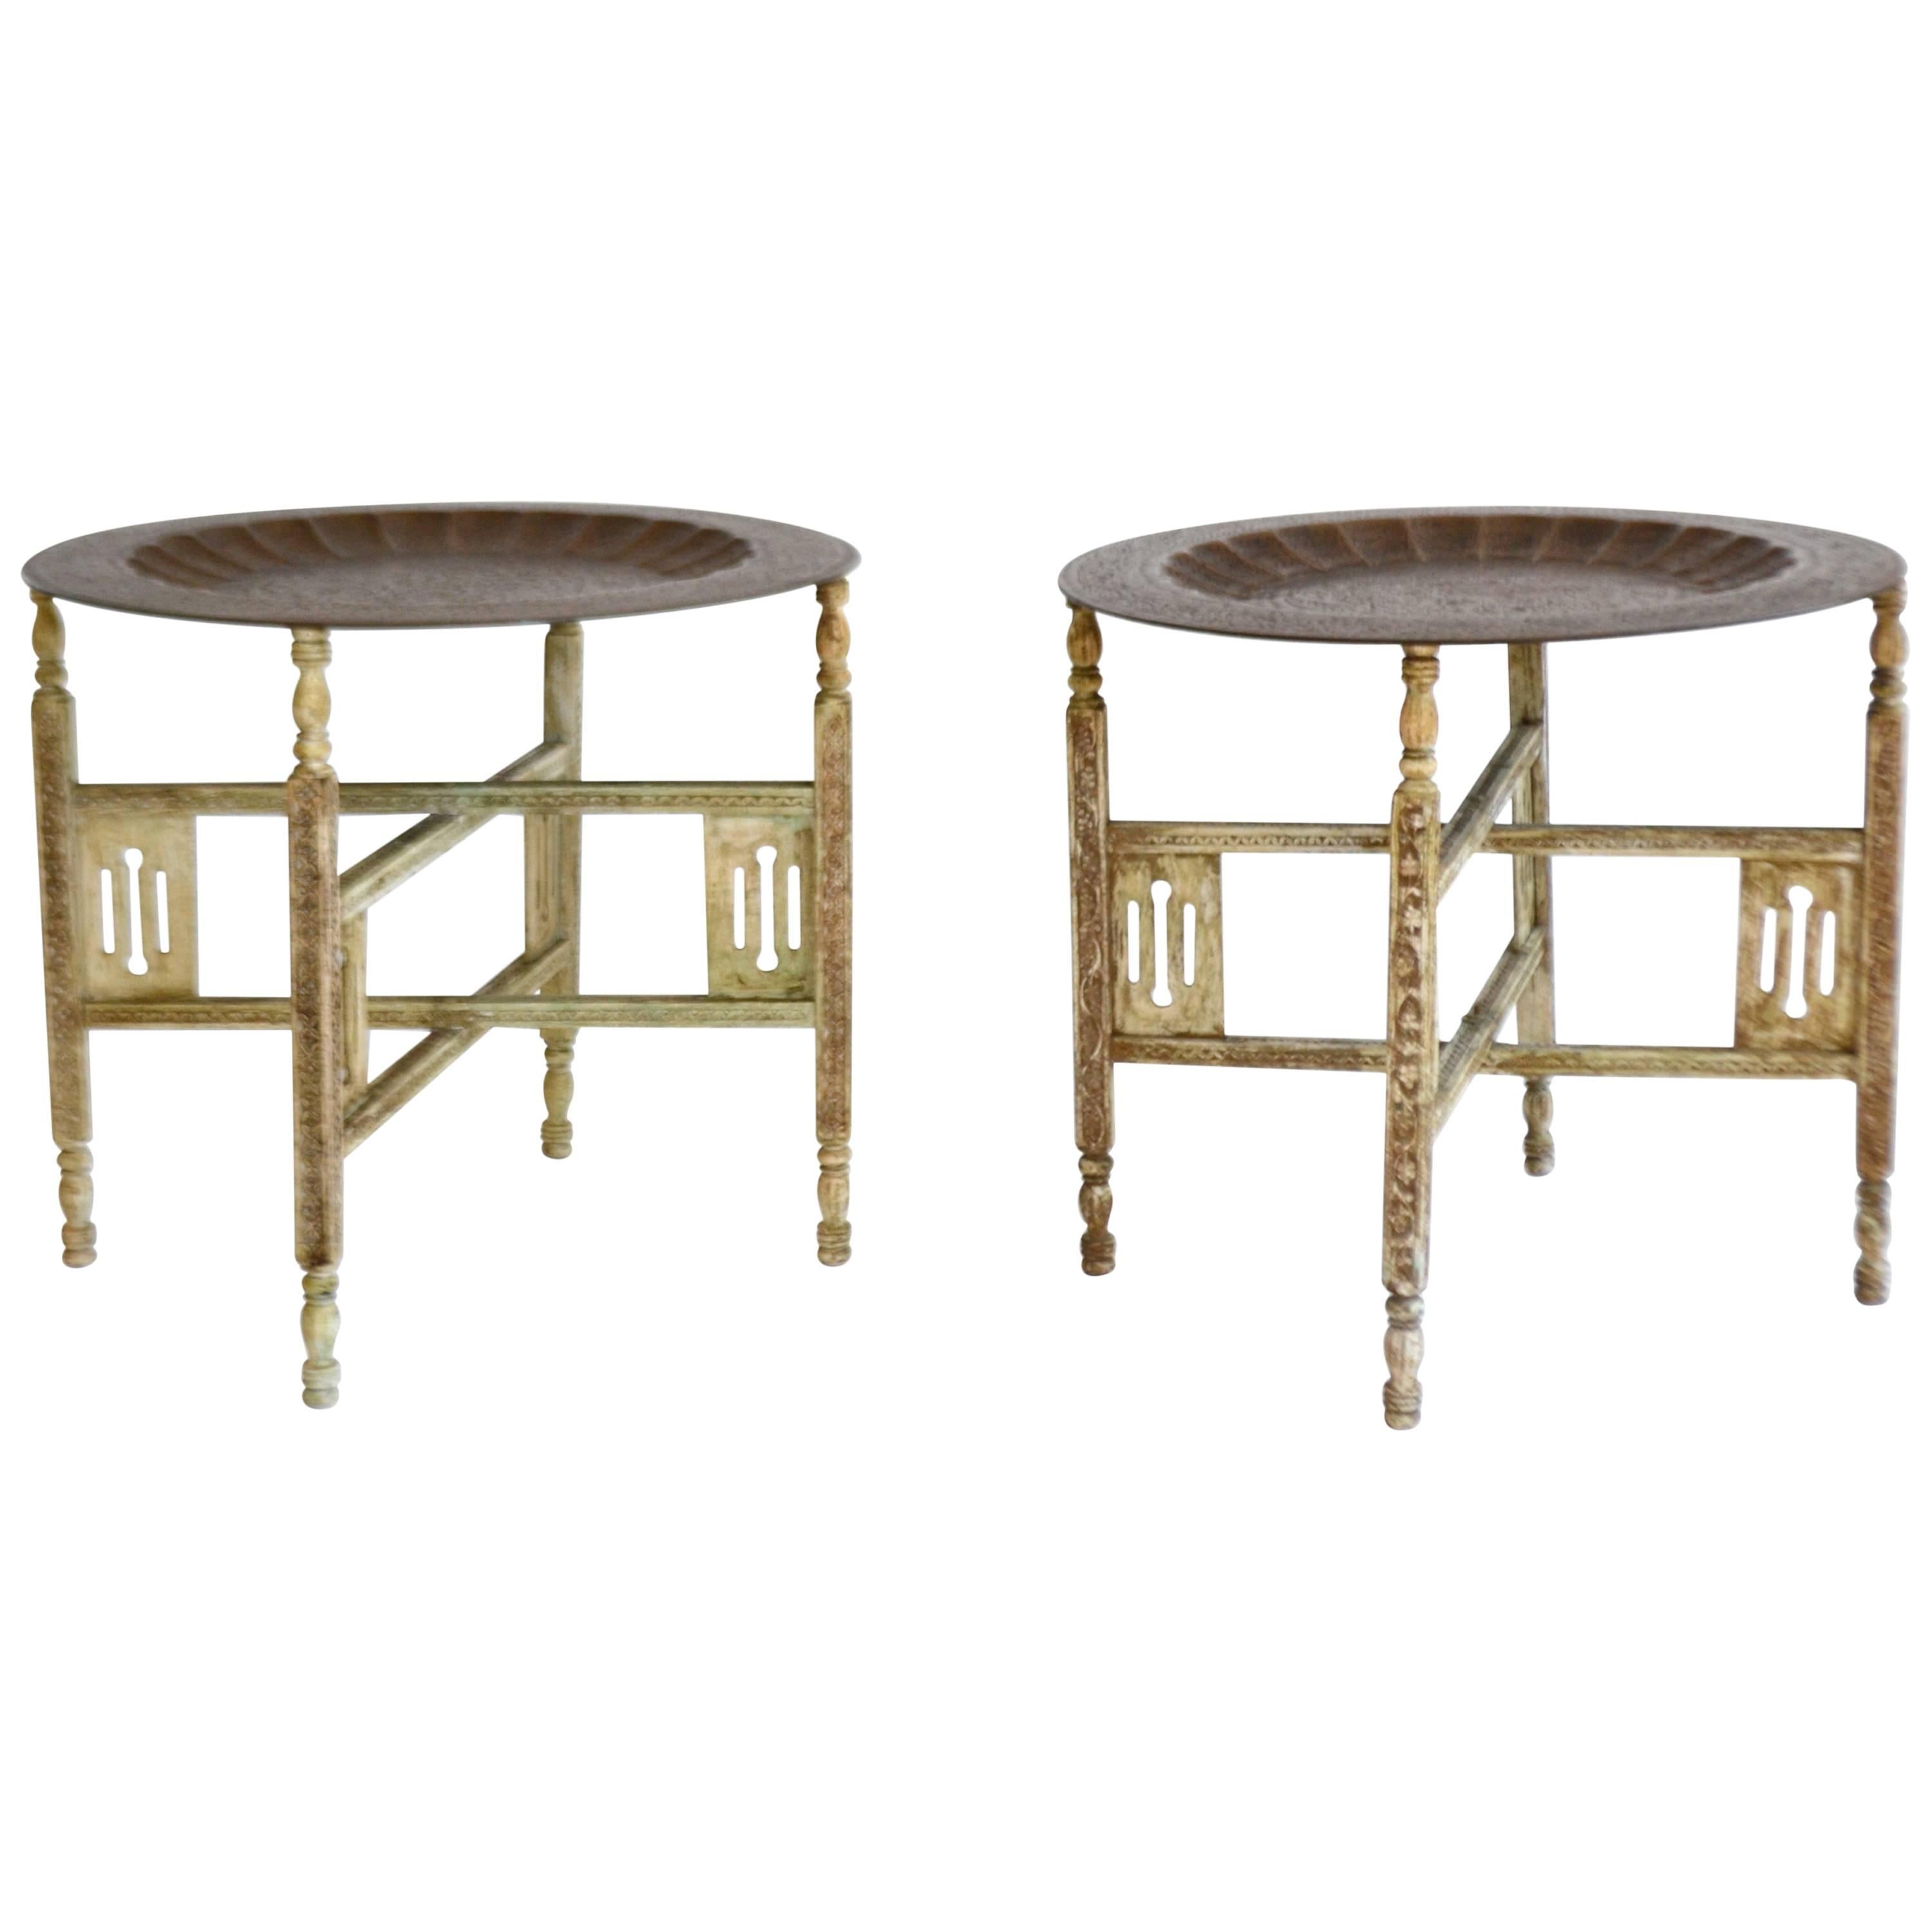 Pair of Anglo-Indian Brass Tray Tables